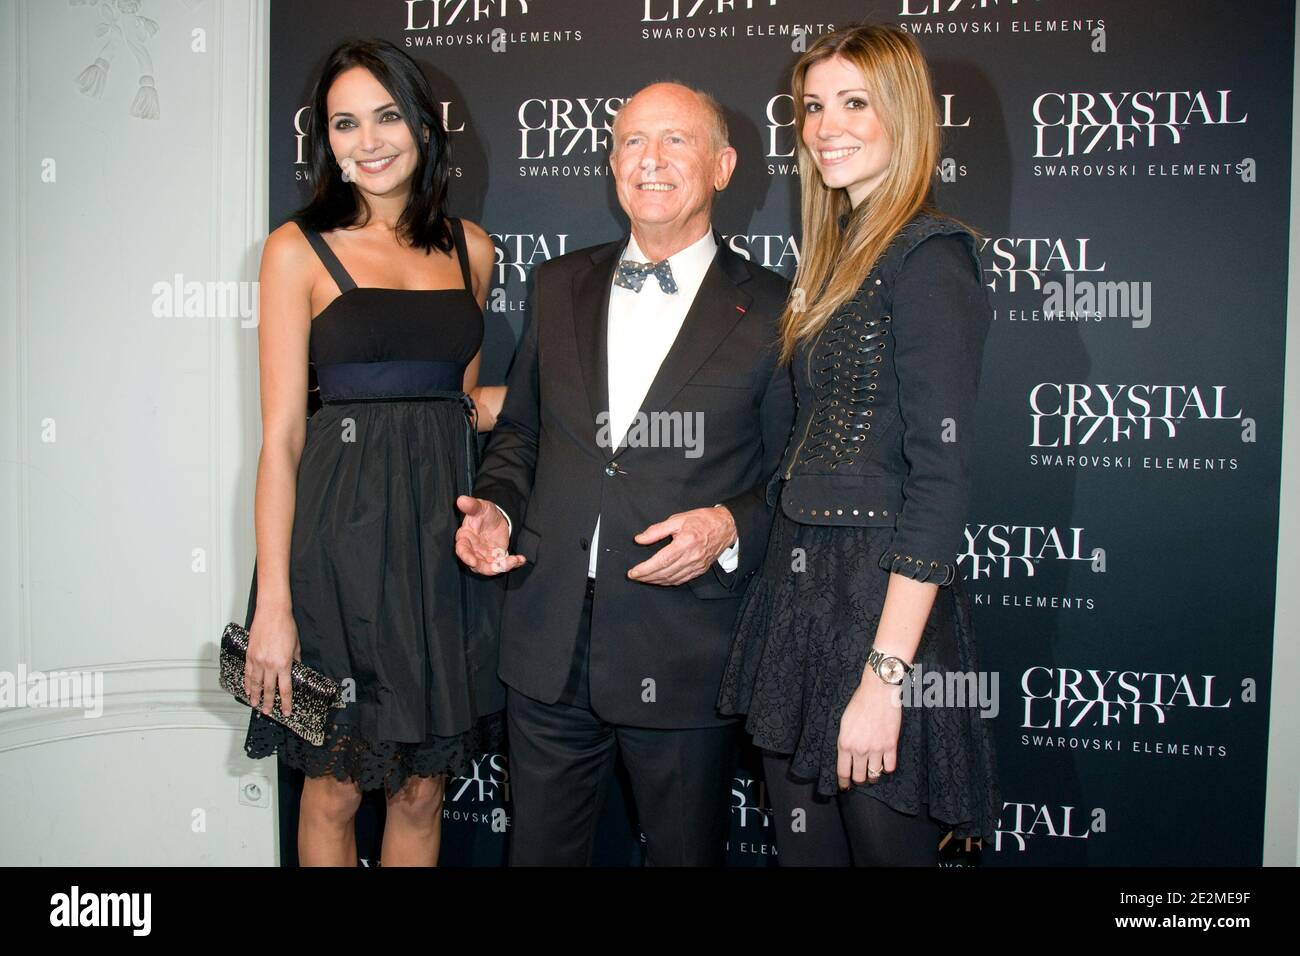 Valerie Begue and Alexandra Rosenfeld posing with the President of the Ligue nationale contre le cancer Francis Larra at the Crystallized Swarovski Elements Ways to say black Exhibition and Party at Hotel Pozzo di Borgo in Paris, France on January 27, 2010. Photo by Mireille Ampilhac/ABACAPRESS.COM Stock Photo